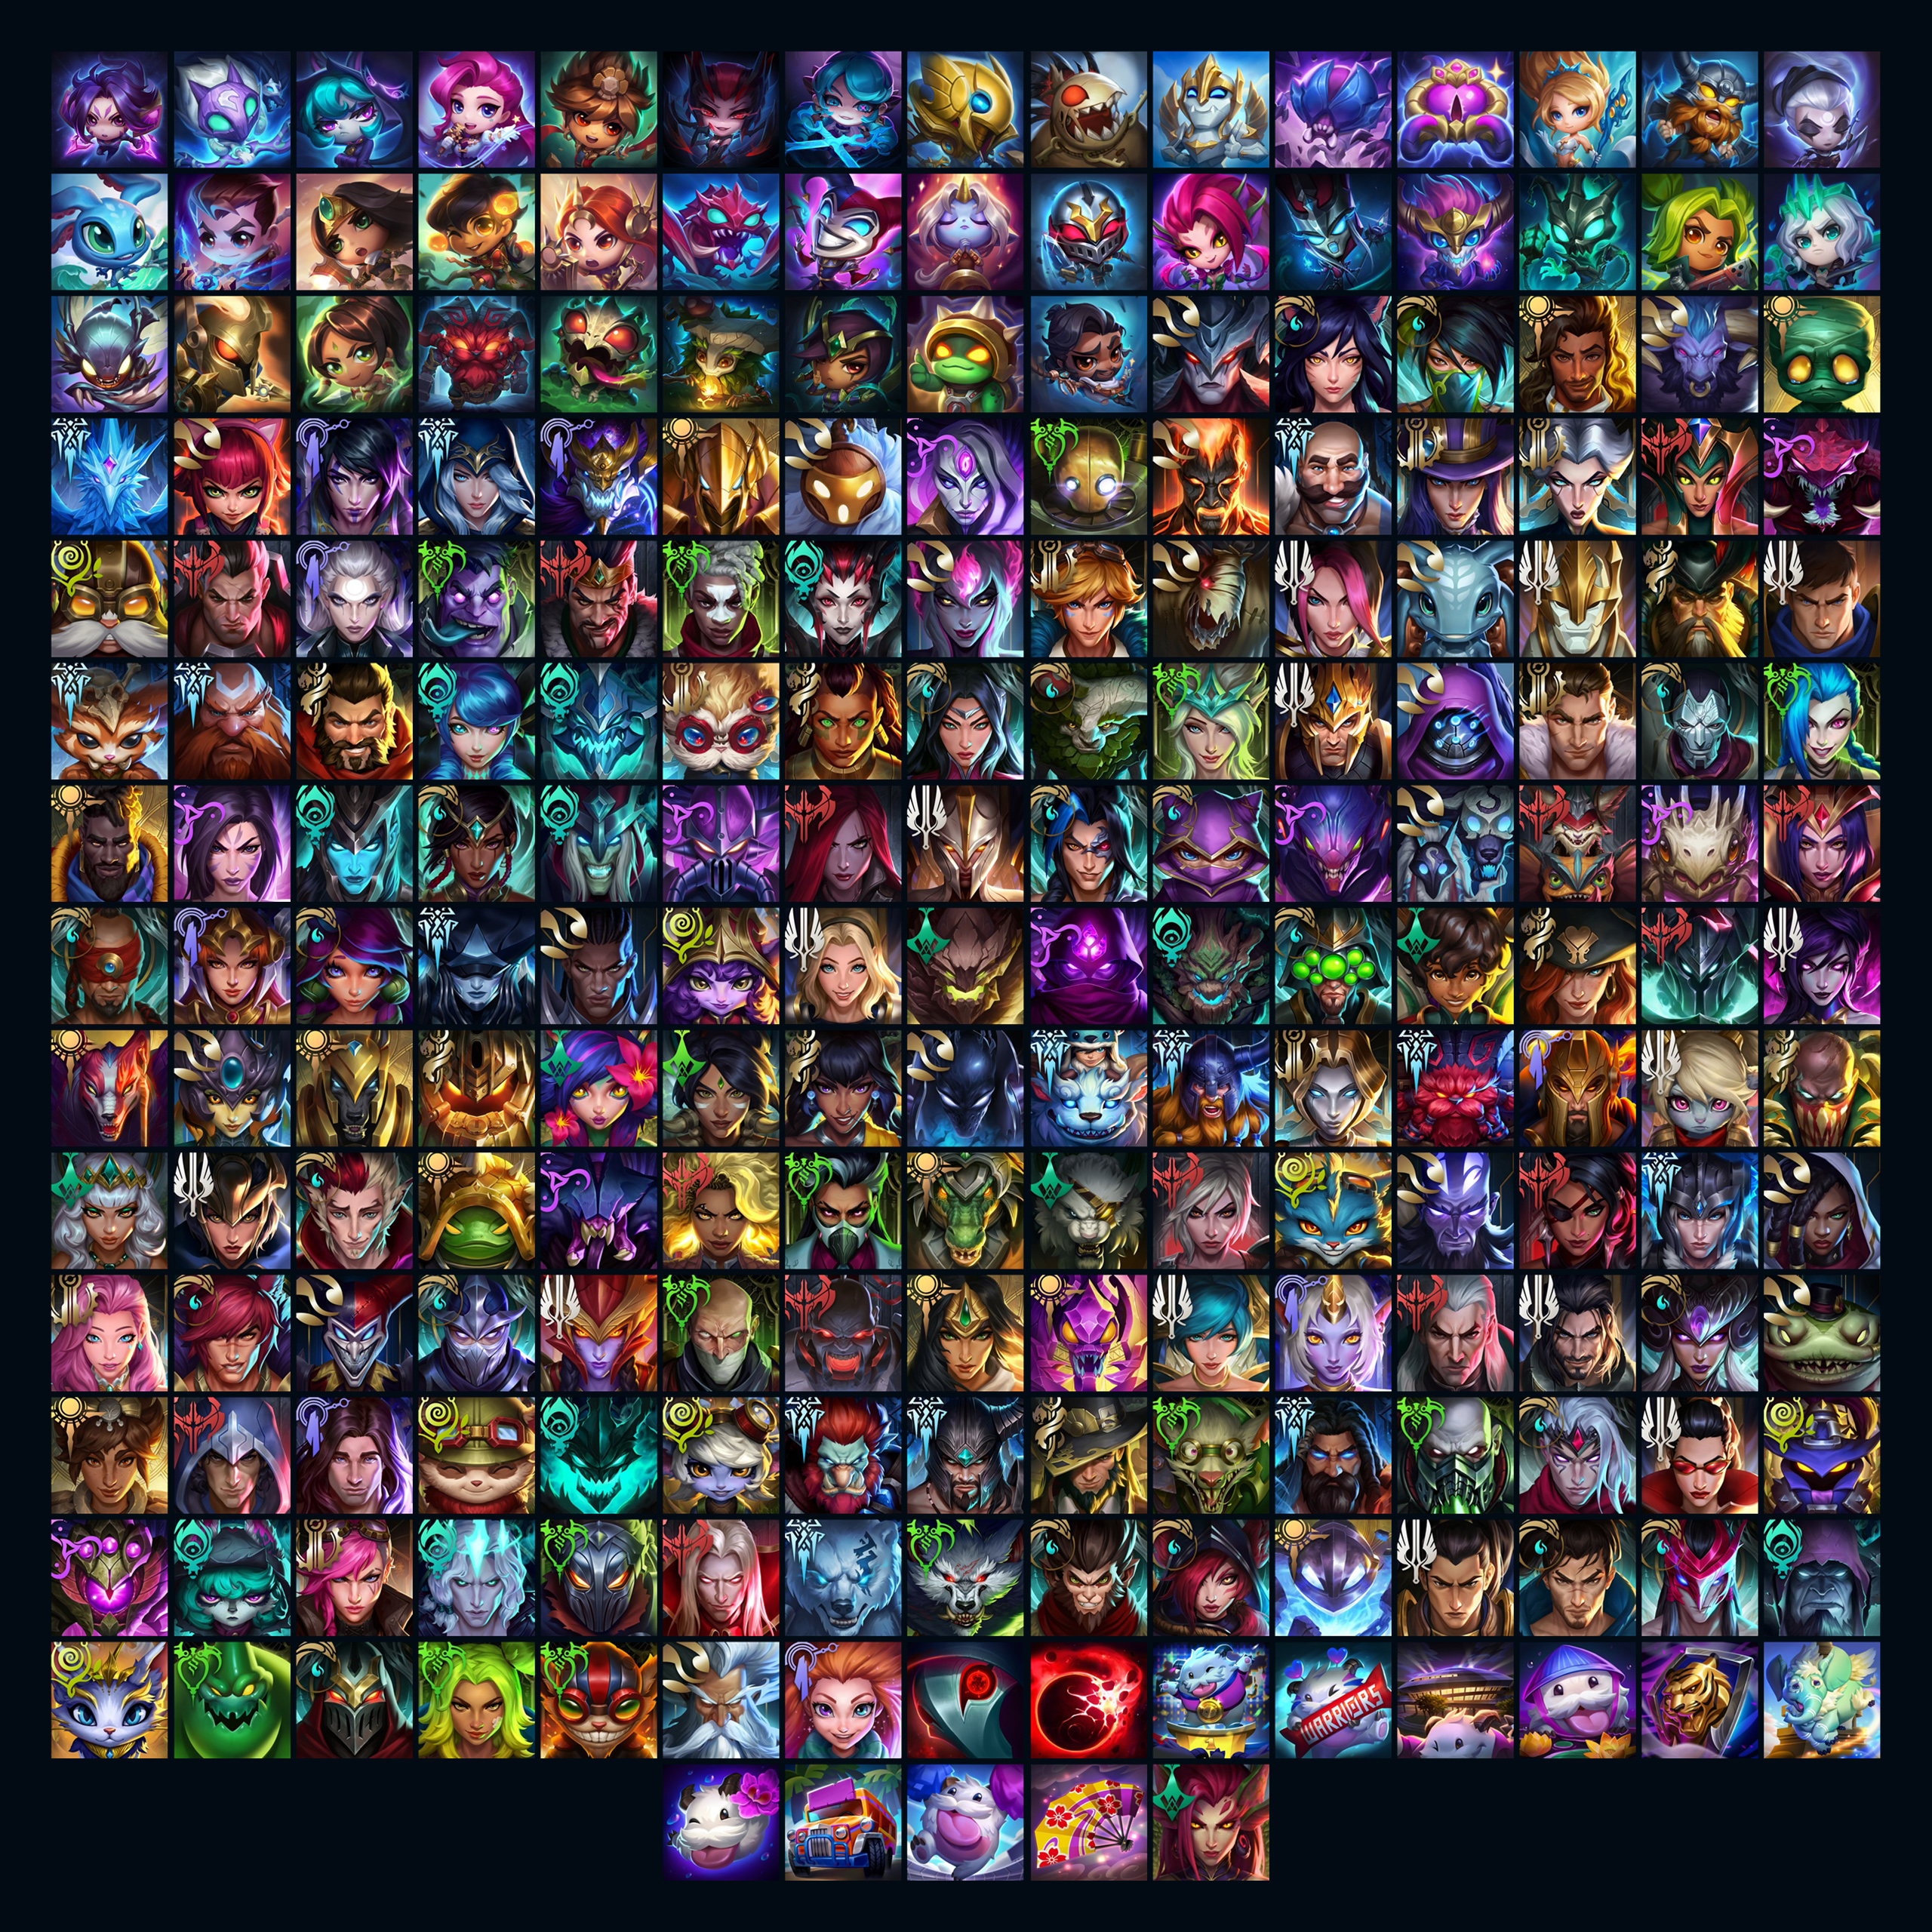 New LoL icons: Every champion is getting new icons next update - Dot Esports